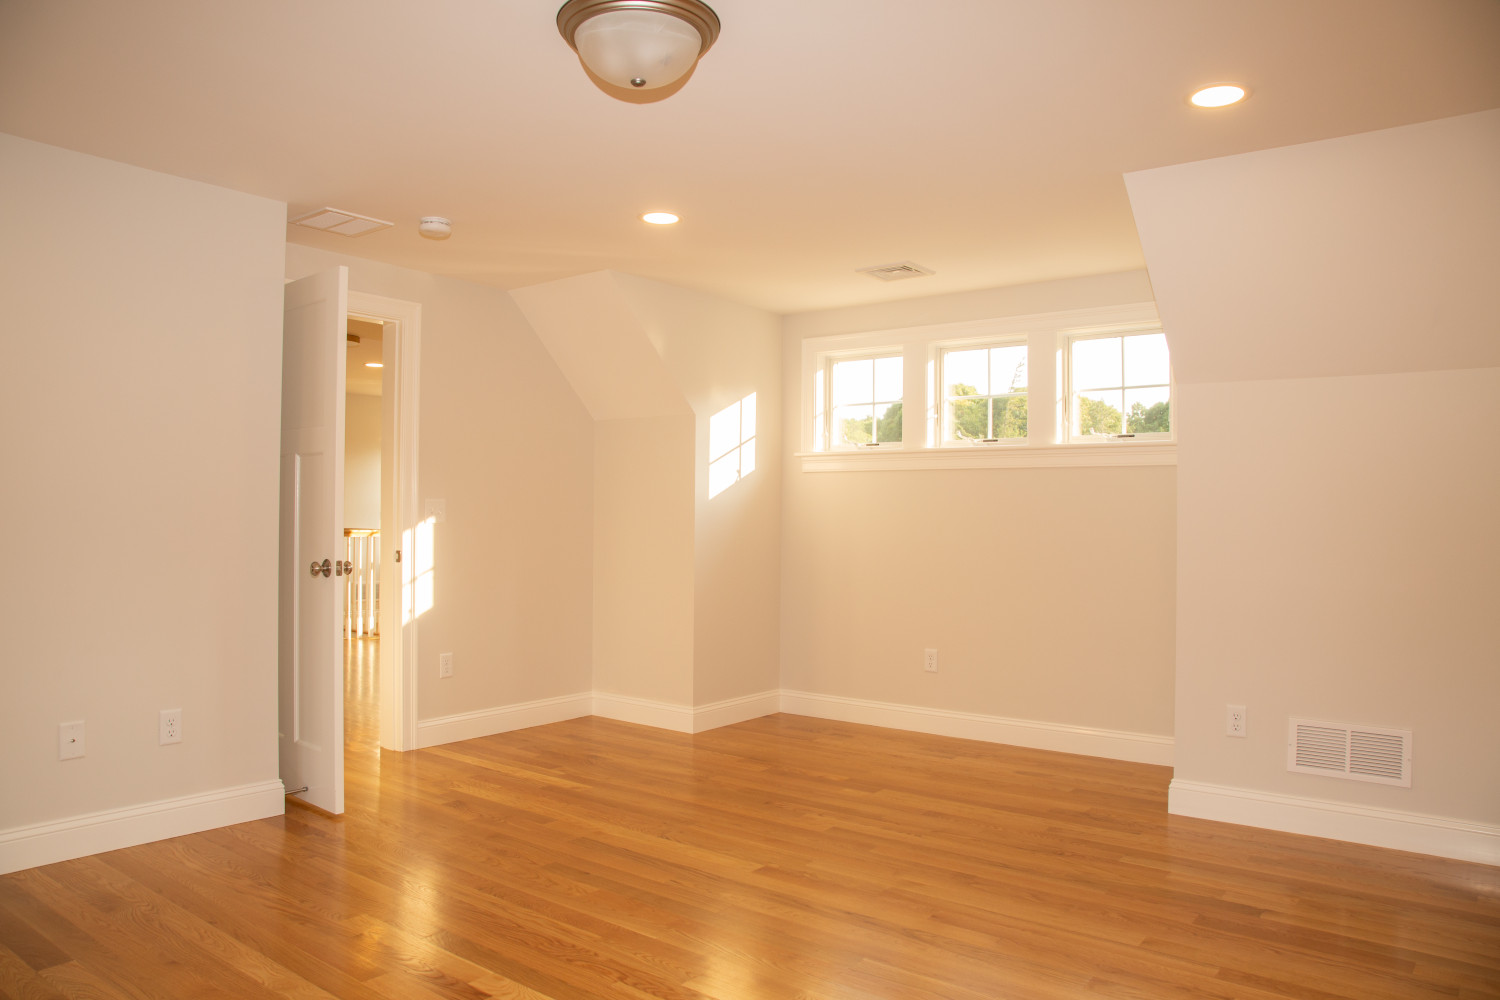 Interior view of wood floors in new home